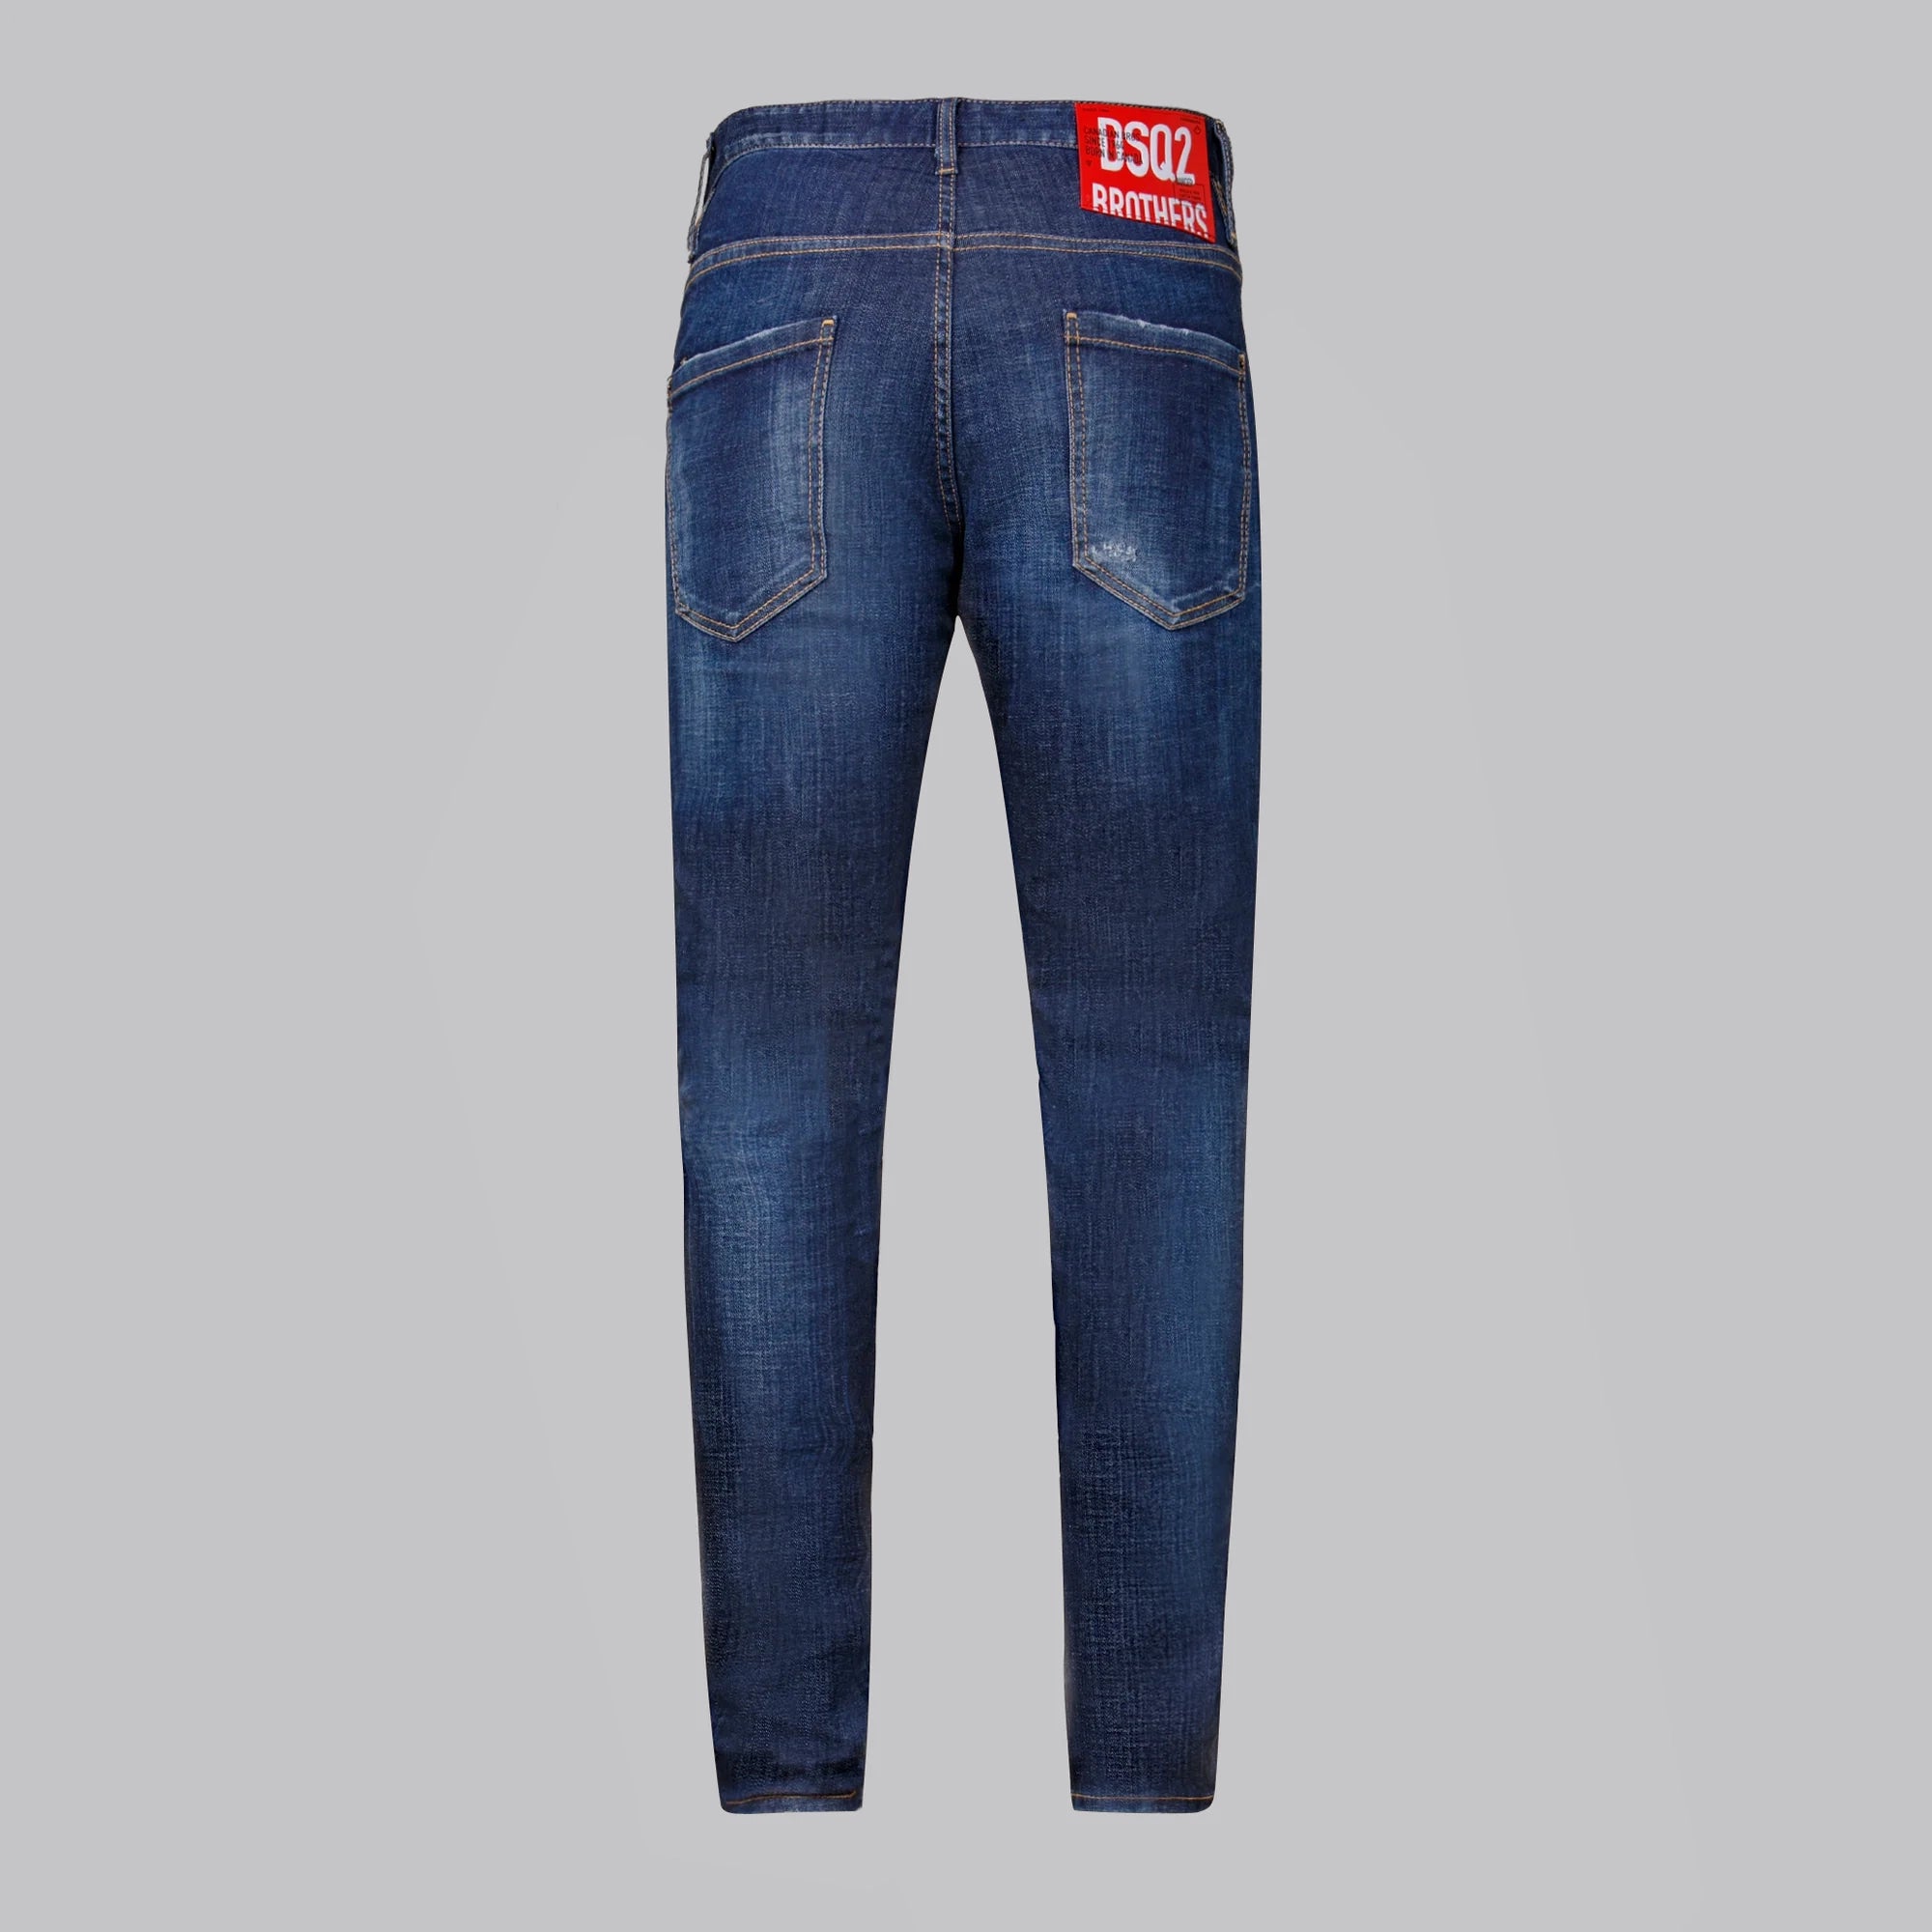 Jeans Denim Dsquared2 Cool Guy Brothers